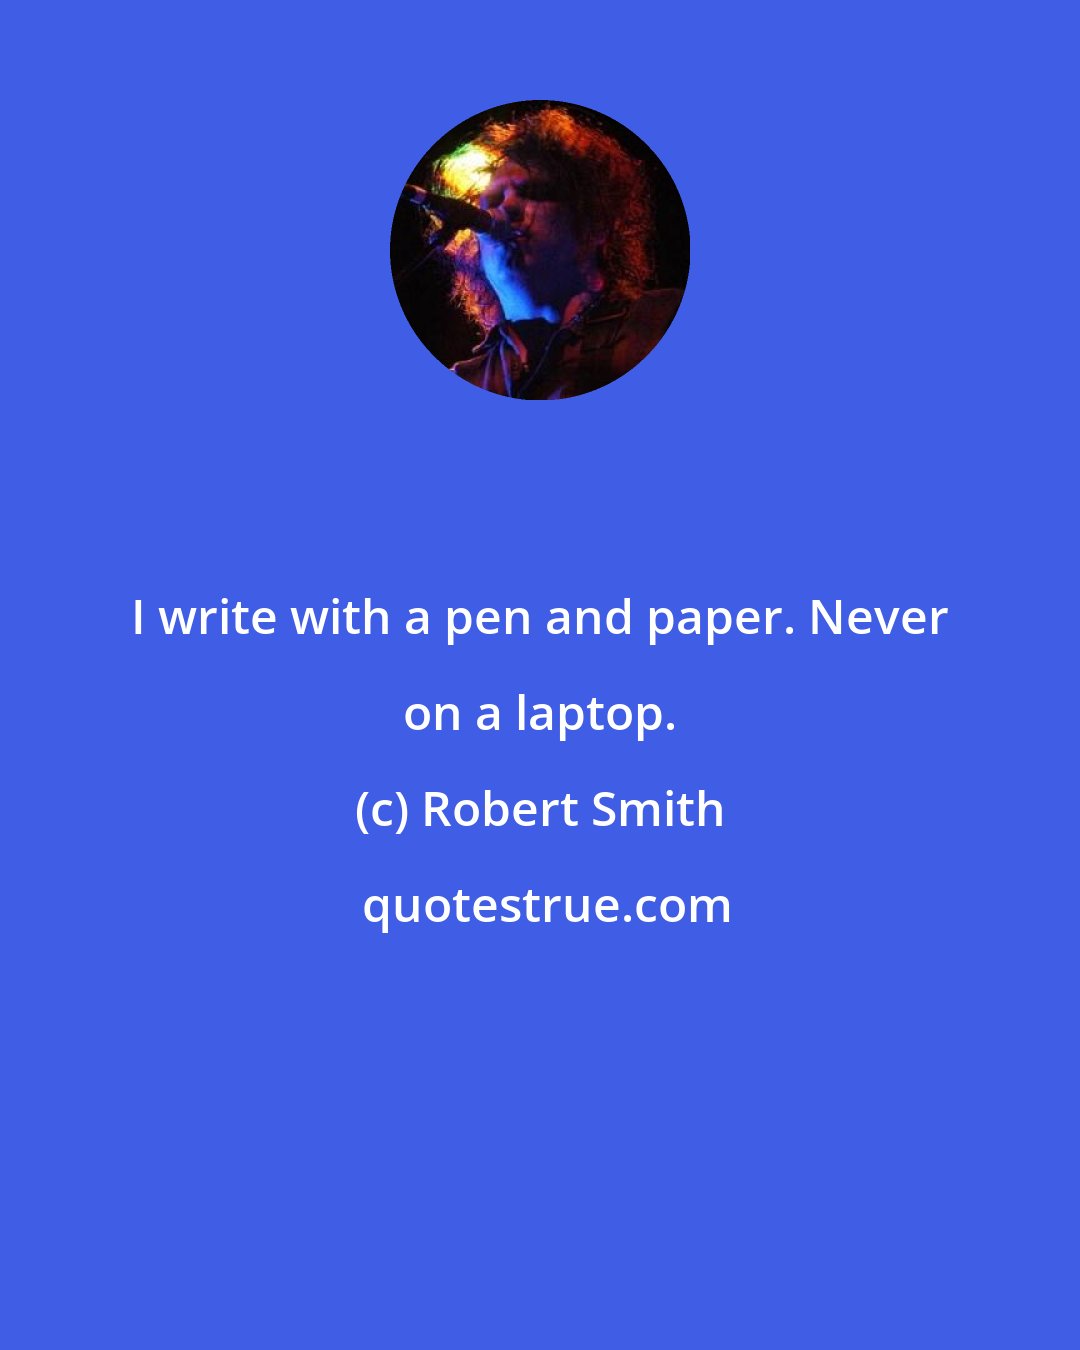 Robert Smith: I write with a pen and paper. Never on a laptop.